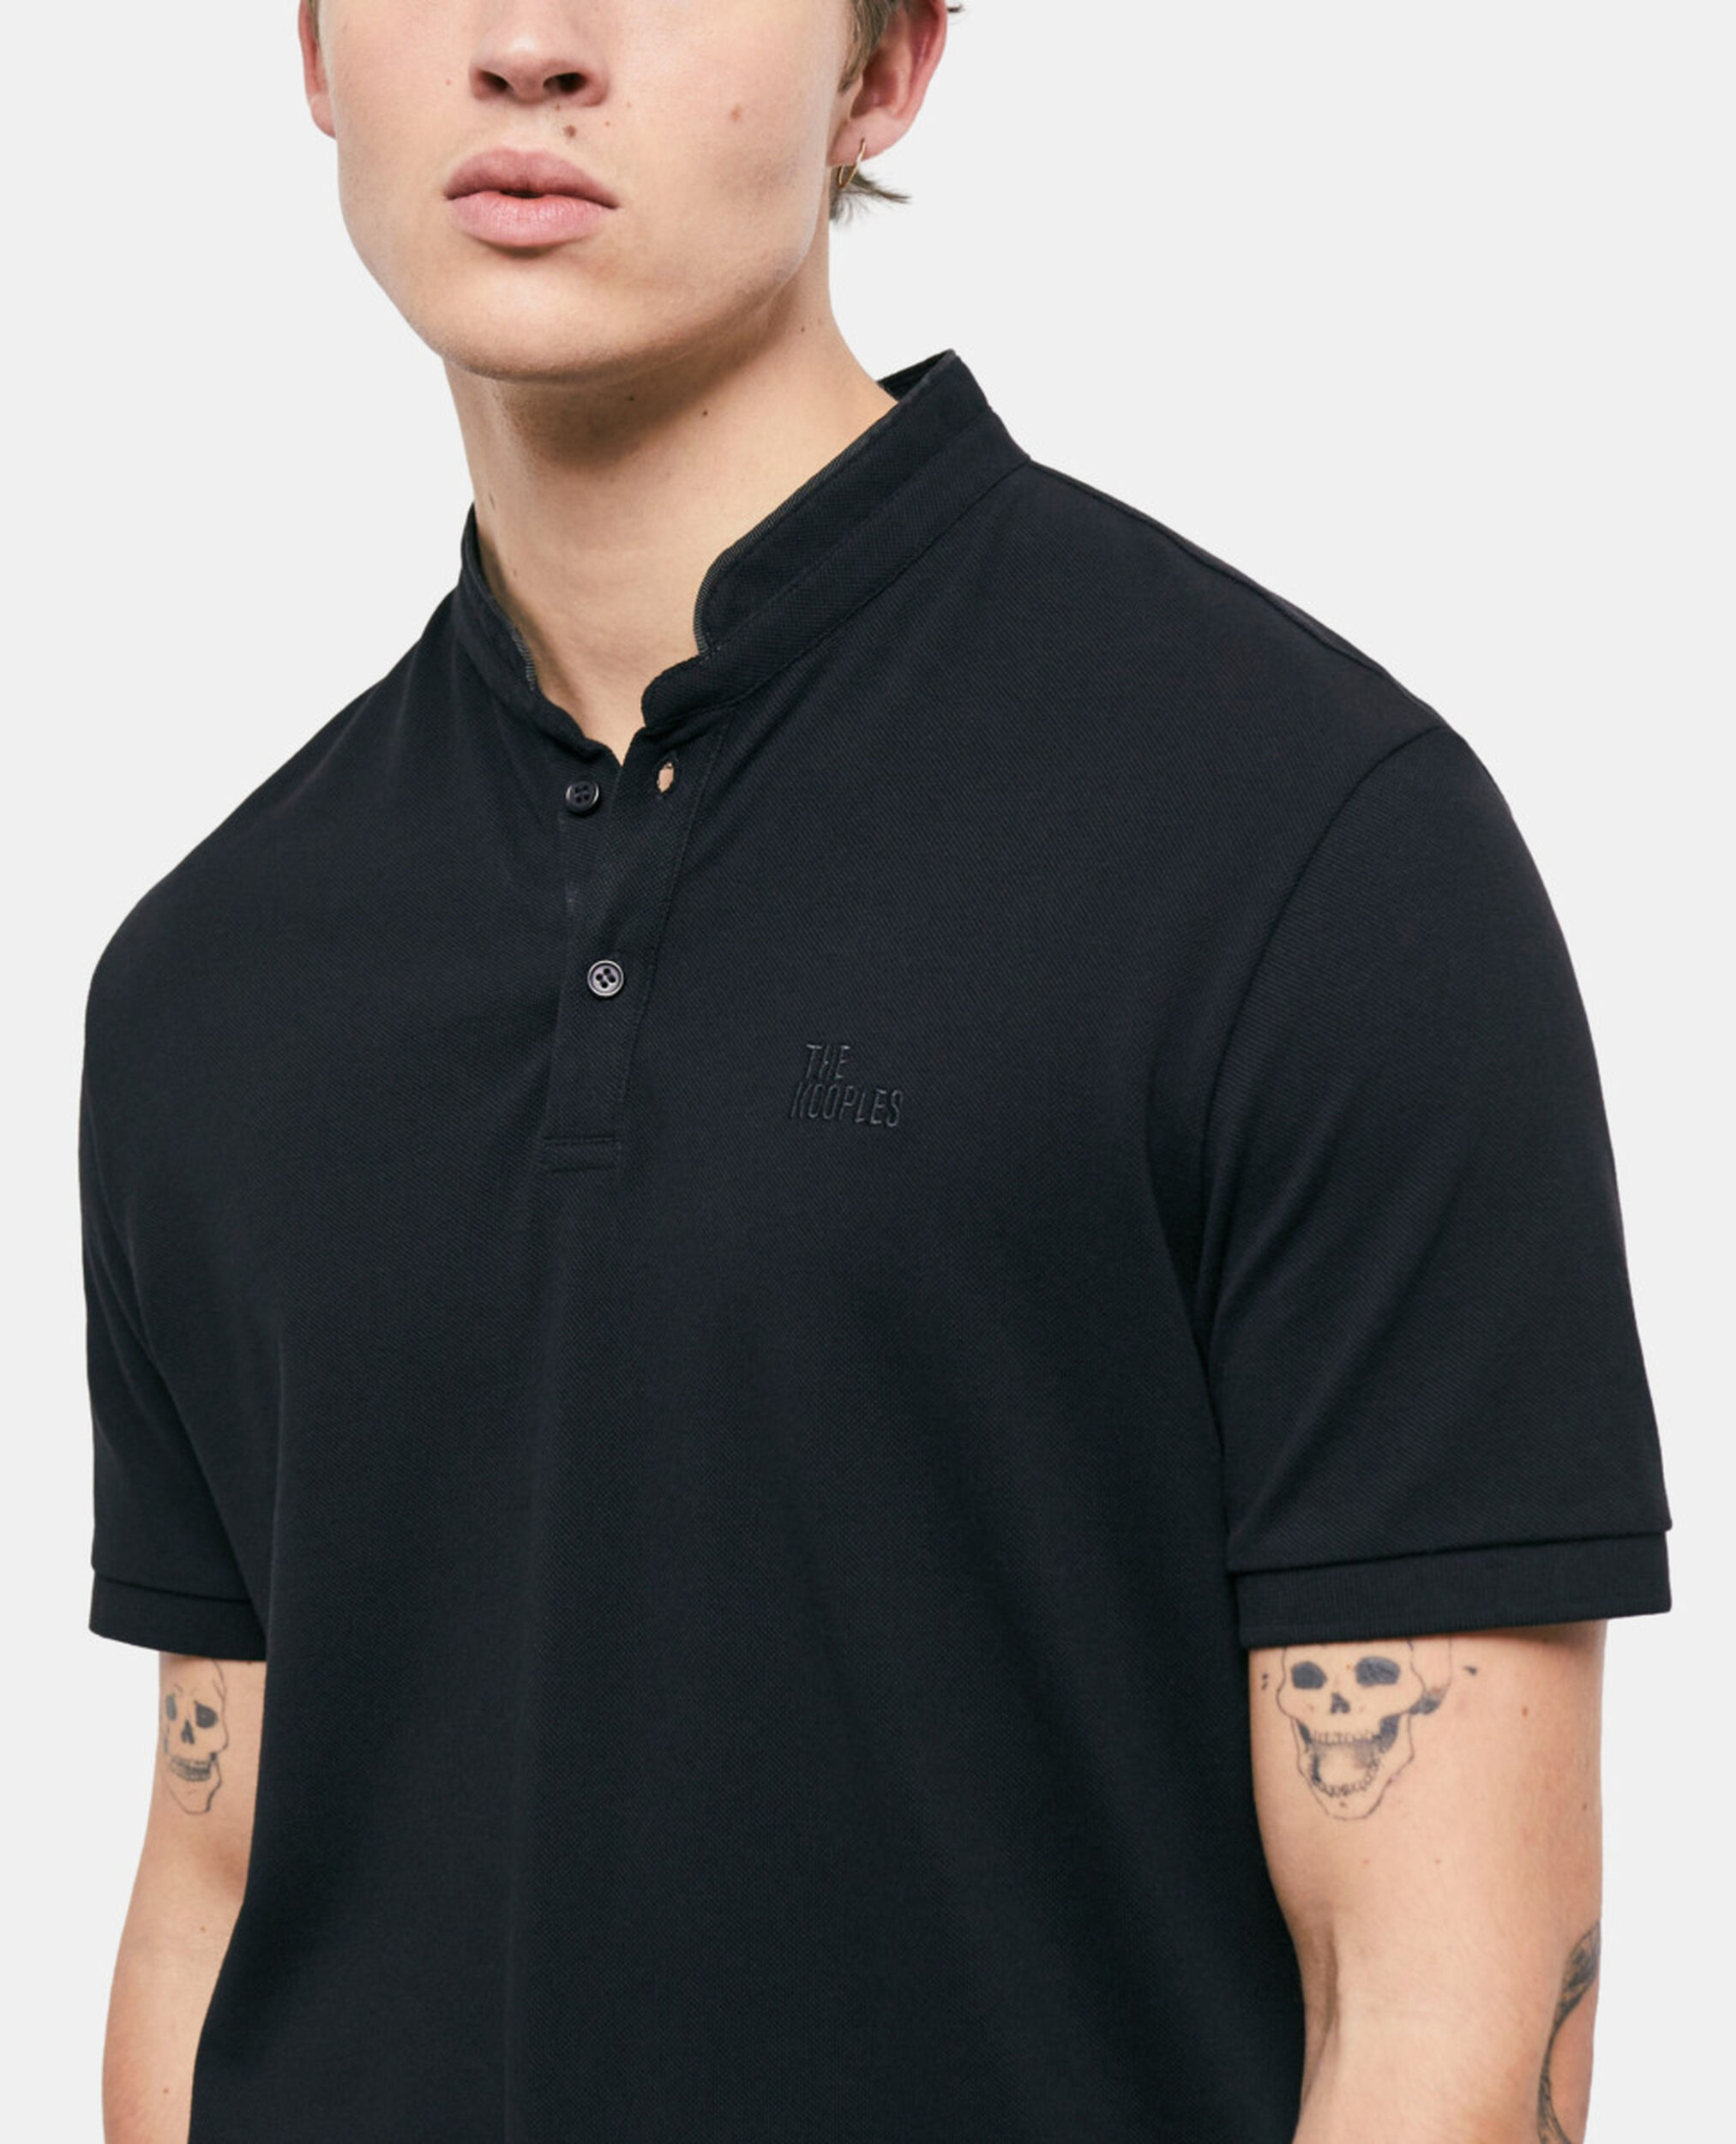 Camisa polo negra, BLACK, hi-res image number null